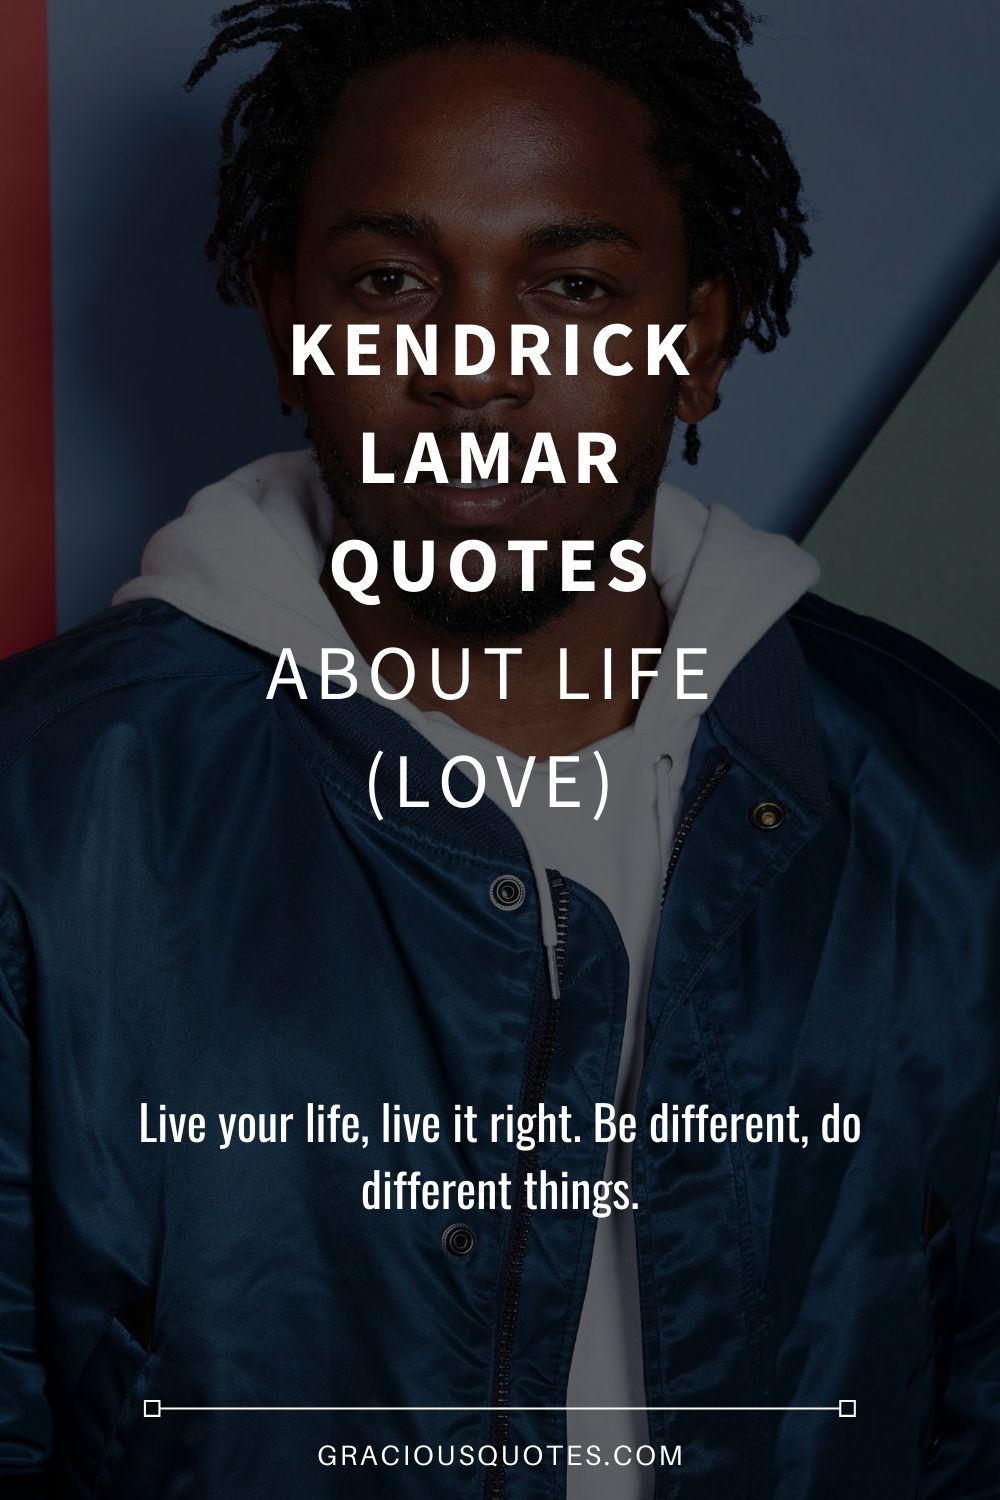 Kendrick Lamar Quotes About Life (LOVE) - Gracious Quotes